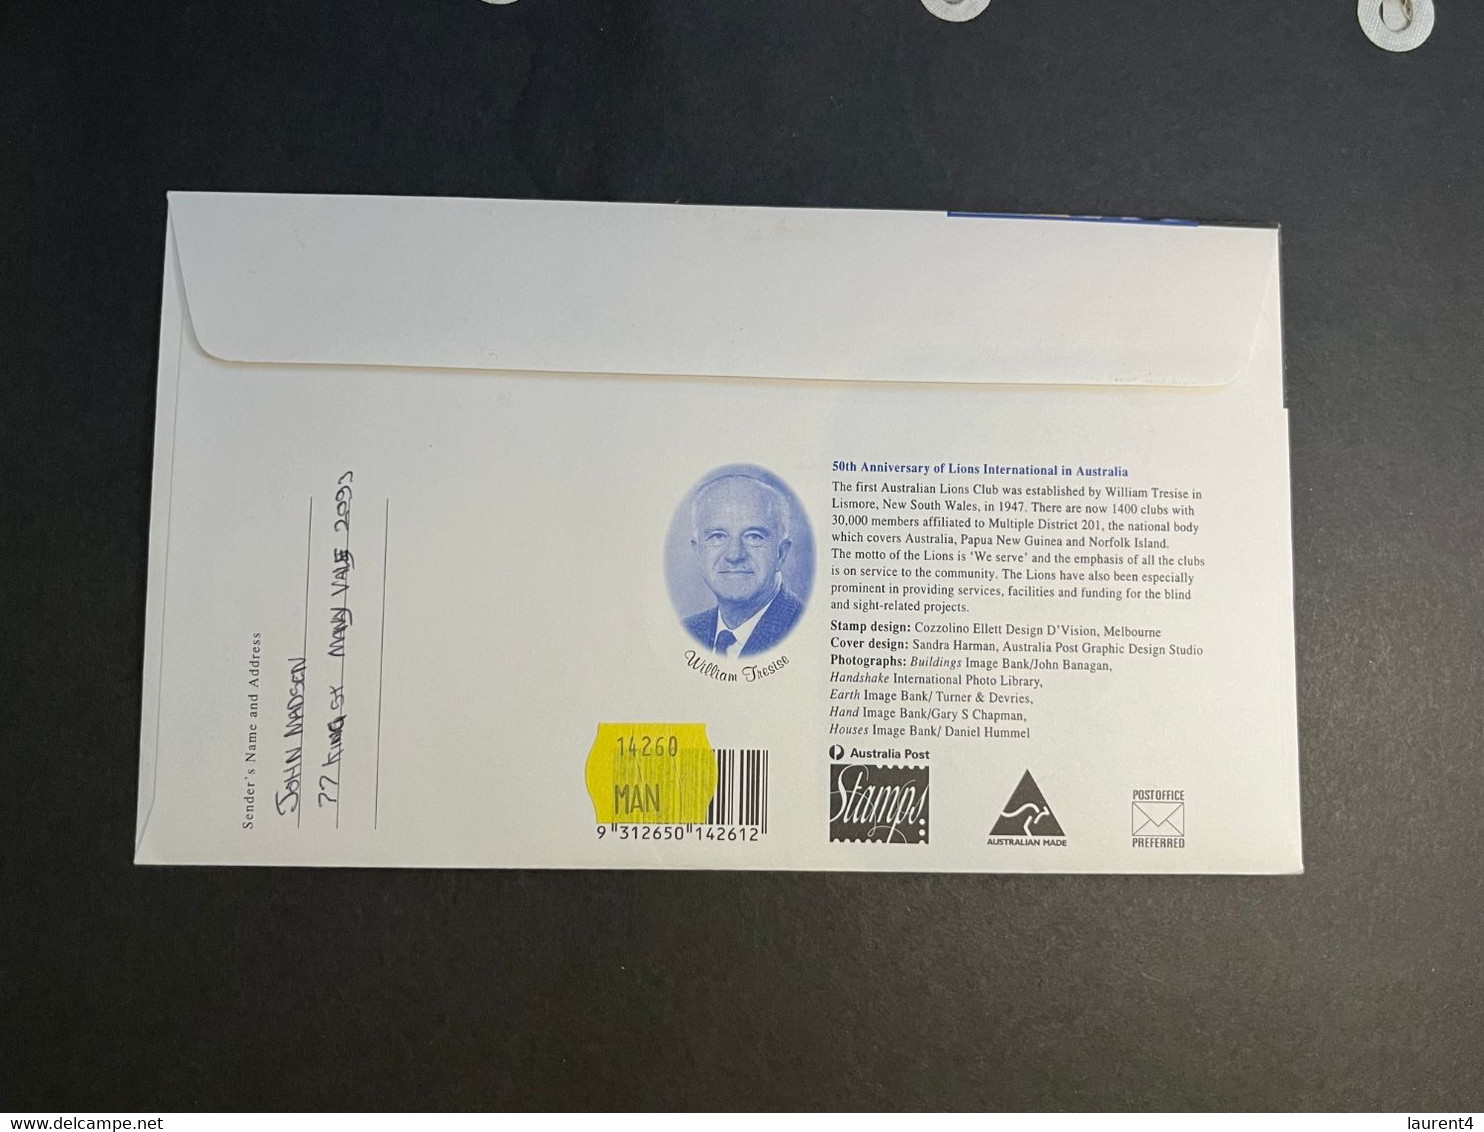 (3 N 35 B) Australia - Underpaid Letter (TAXED) No Stamp Used On Cover (Lions 50th Anniversary FDC Cover) - Plaatfouten En Curiosa